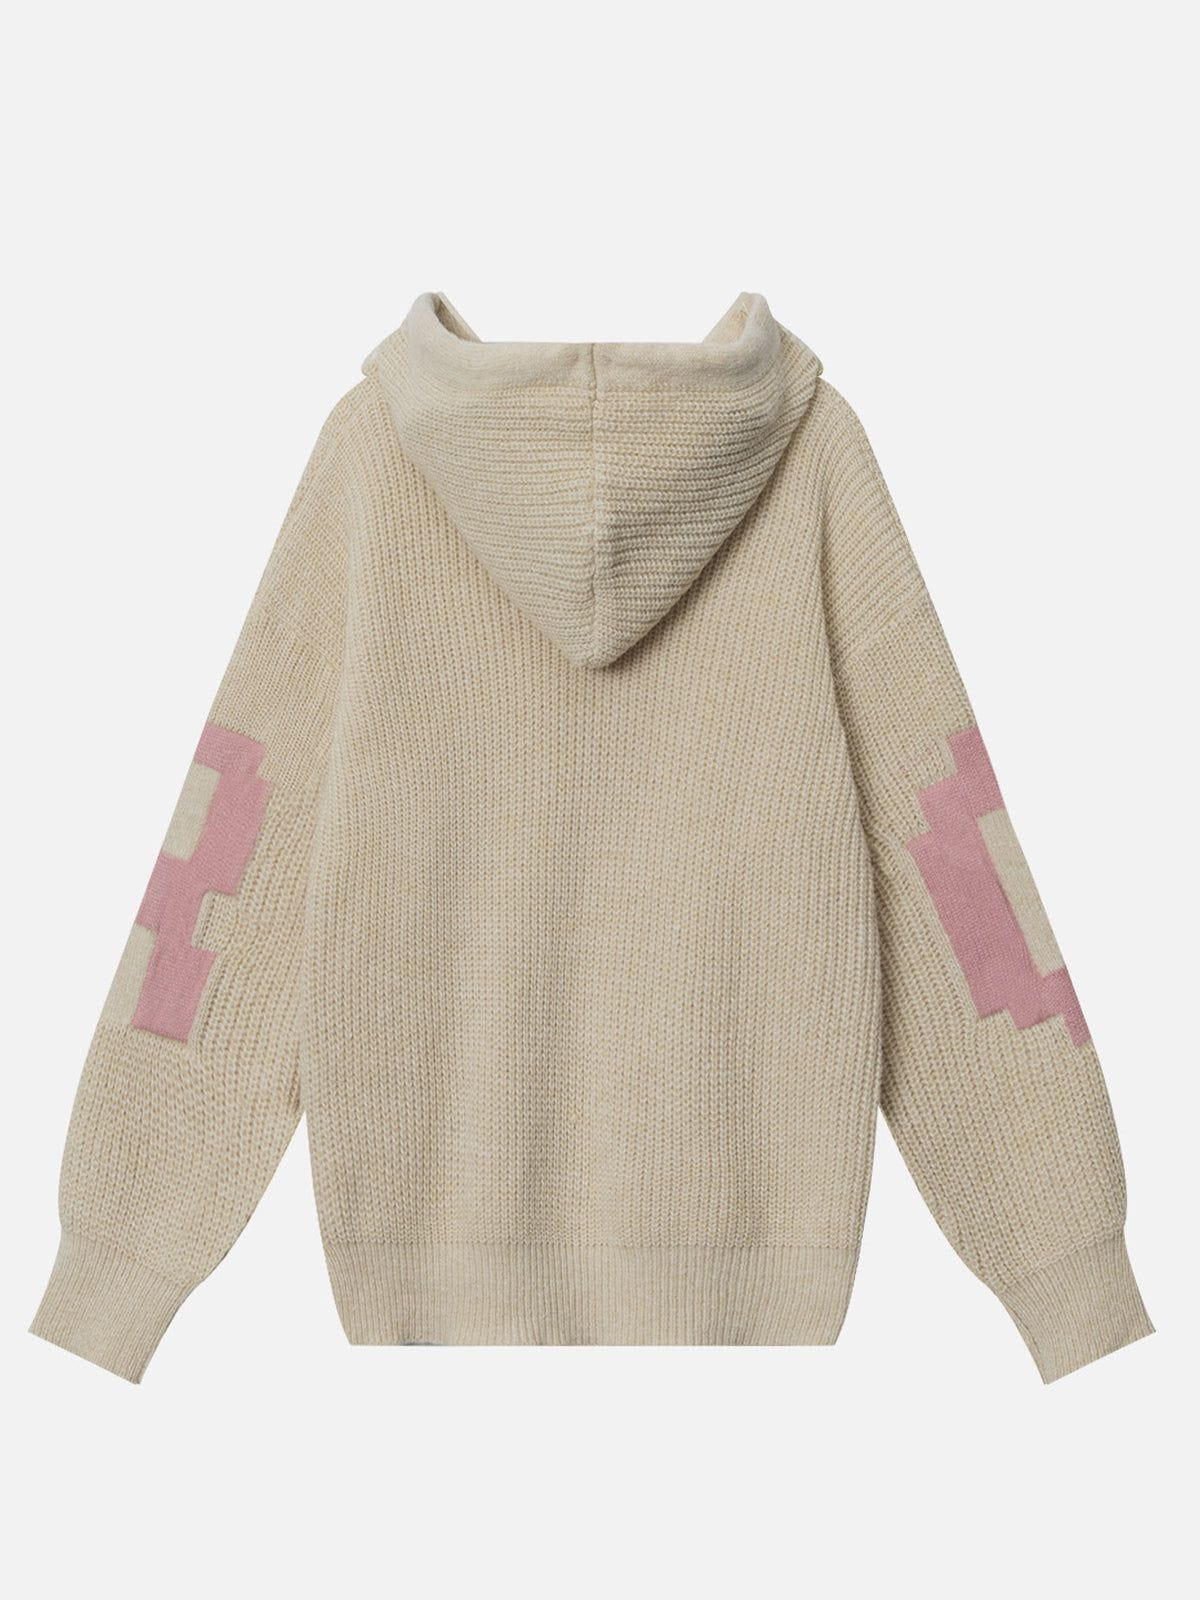 Aelfric Eden Letter Jacquard Knit Hoodie